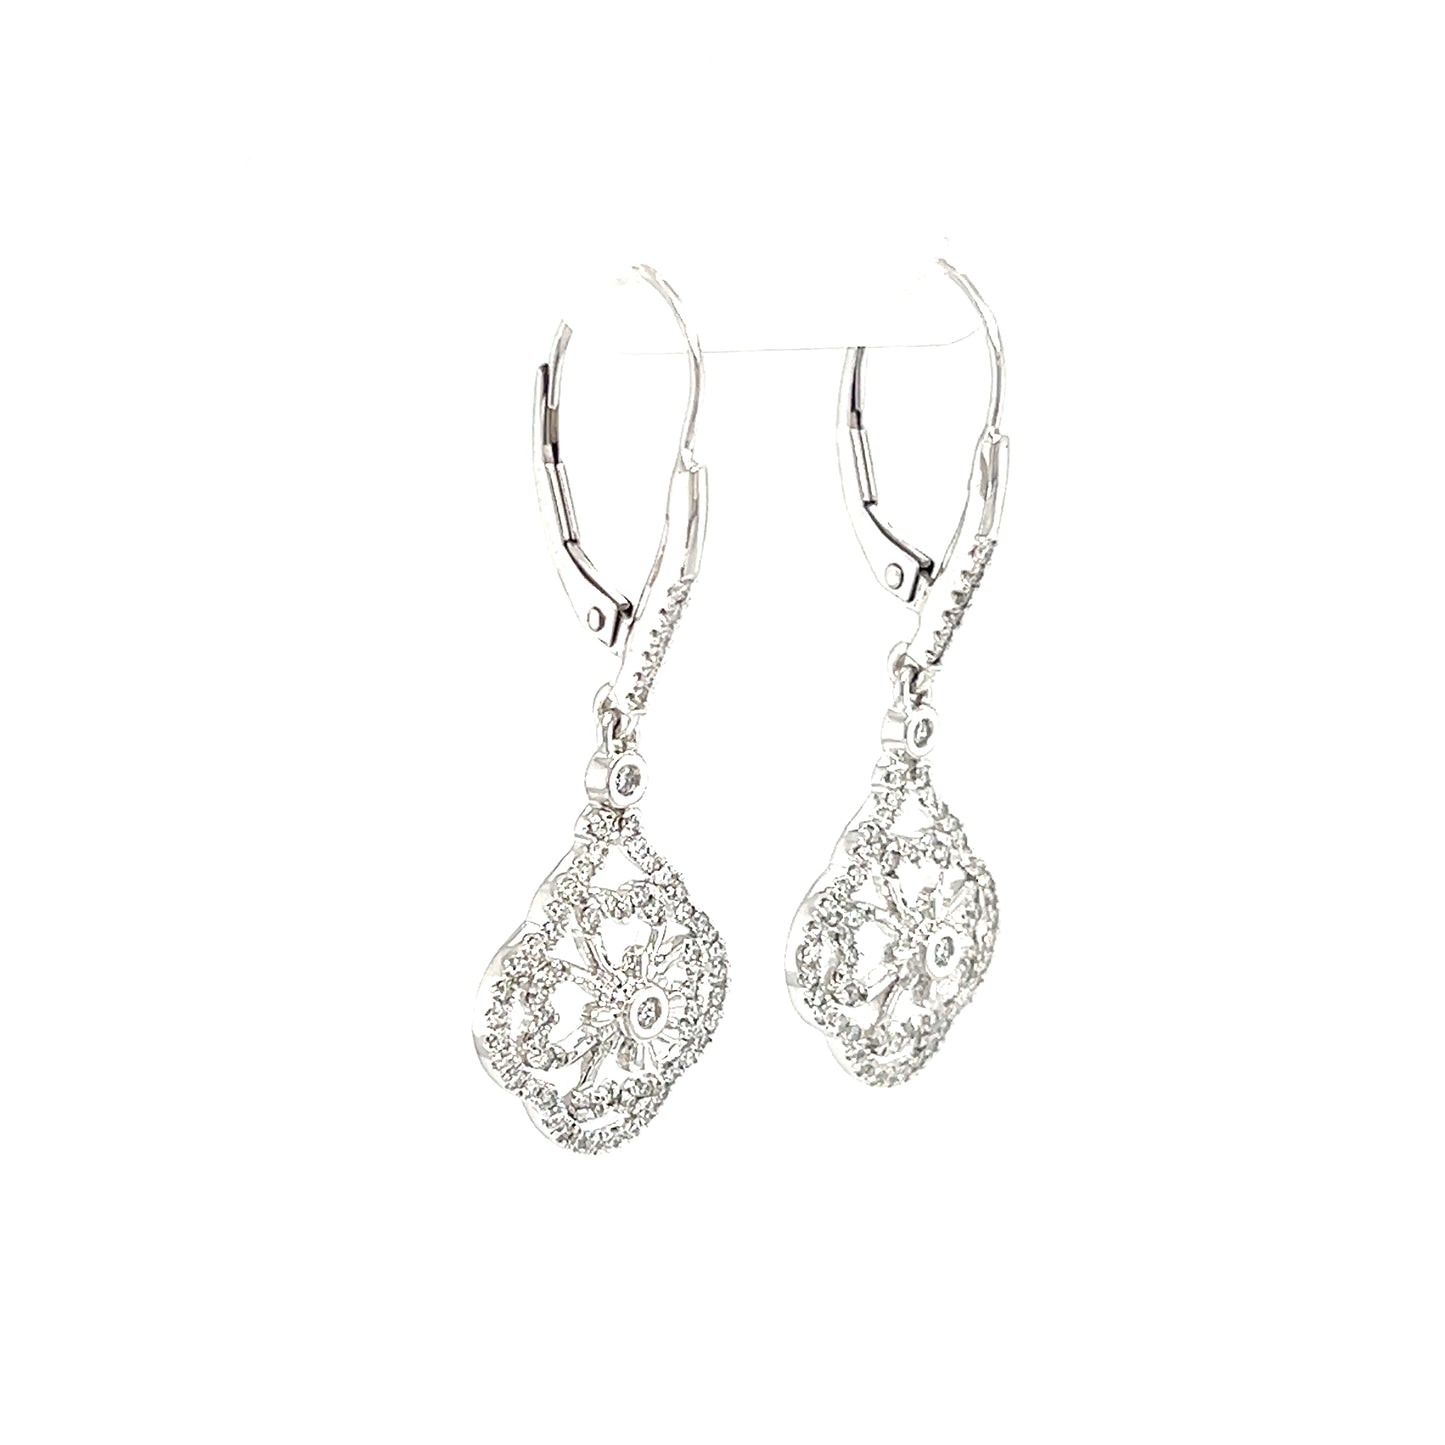 Floral Diamond Dangle Earrings with 0.55ctw of Diamonds in 14K White Gold